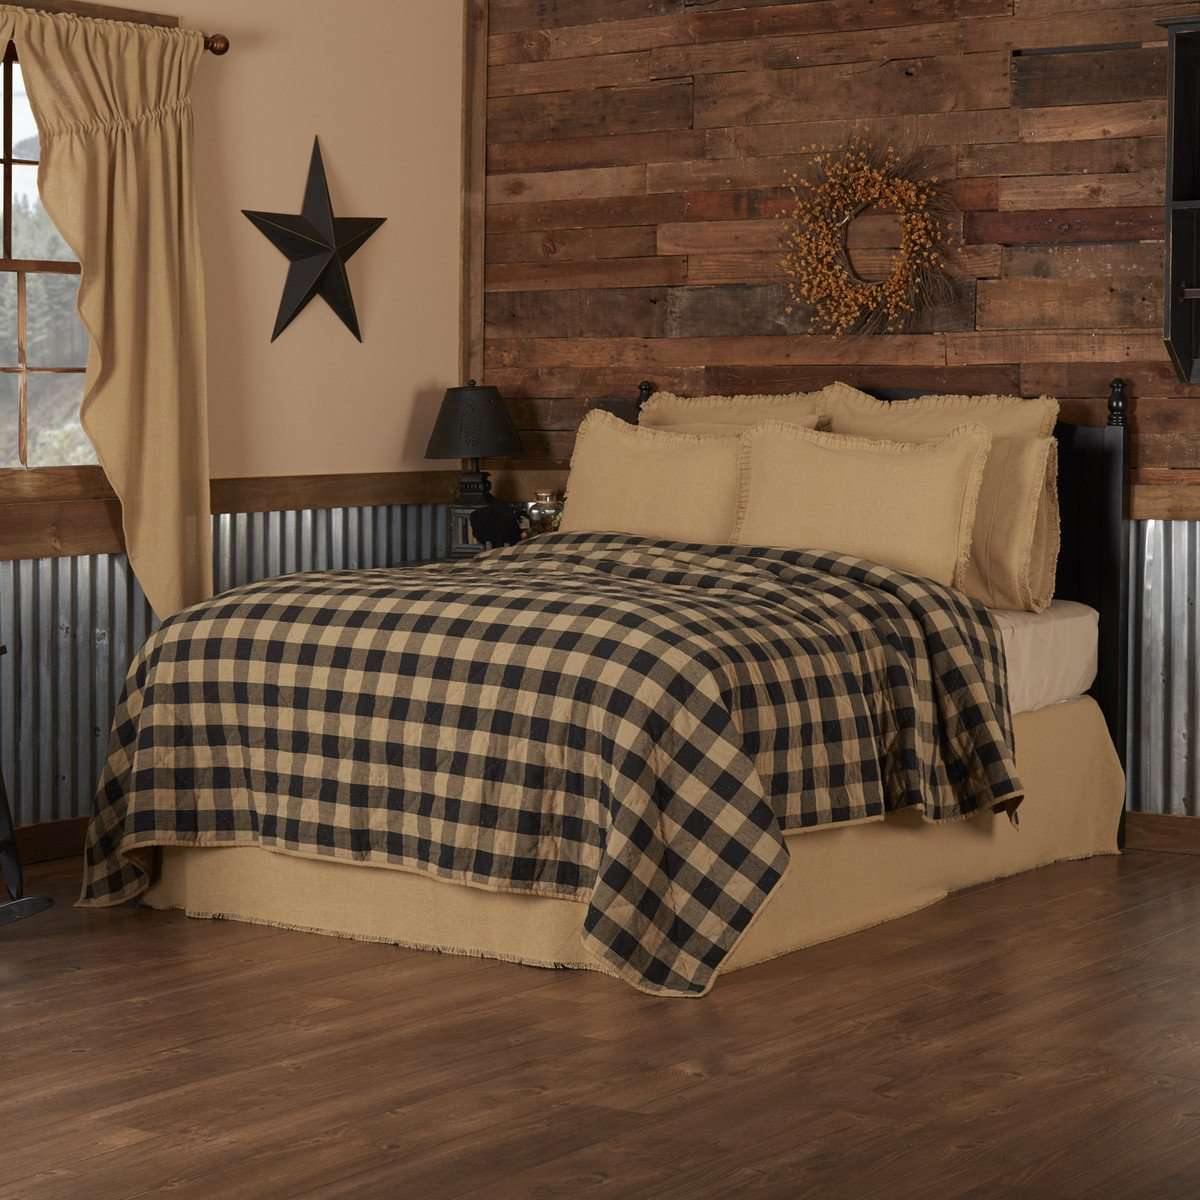 Black Check Quilt Coverlet VHC Brands shop now